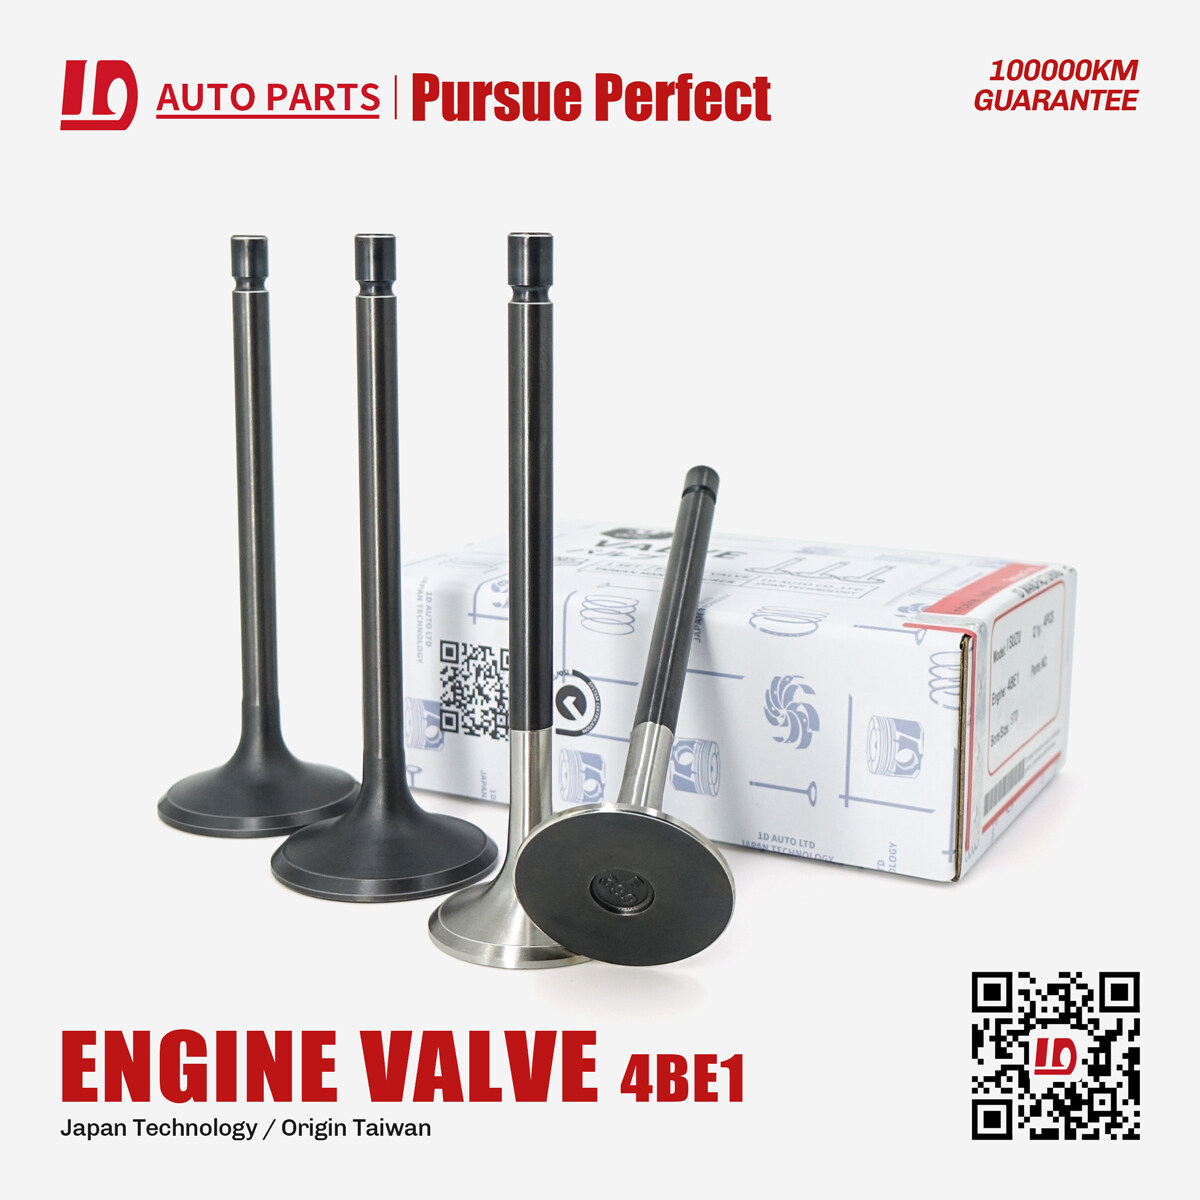 Engine Valves 5 12552043 0 Intake And 8 94110111 0 Exhaust Valves For Engine Valve 4be11